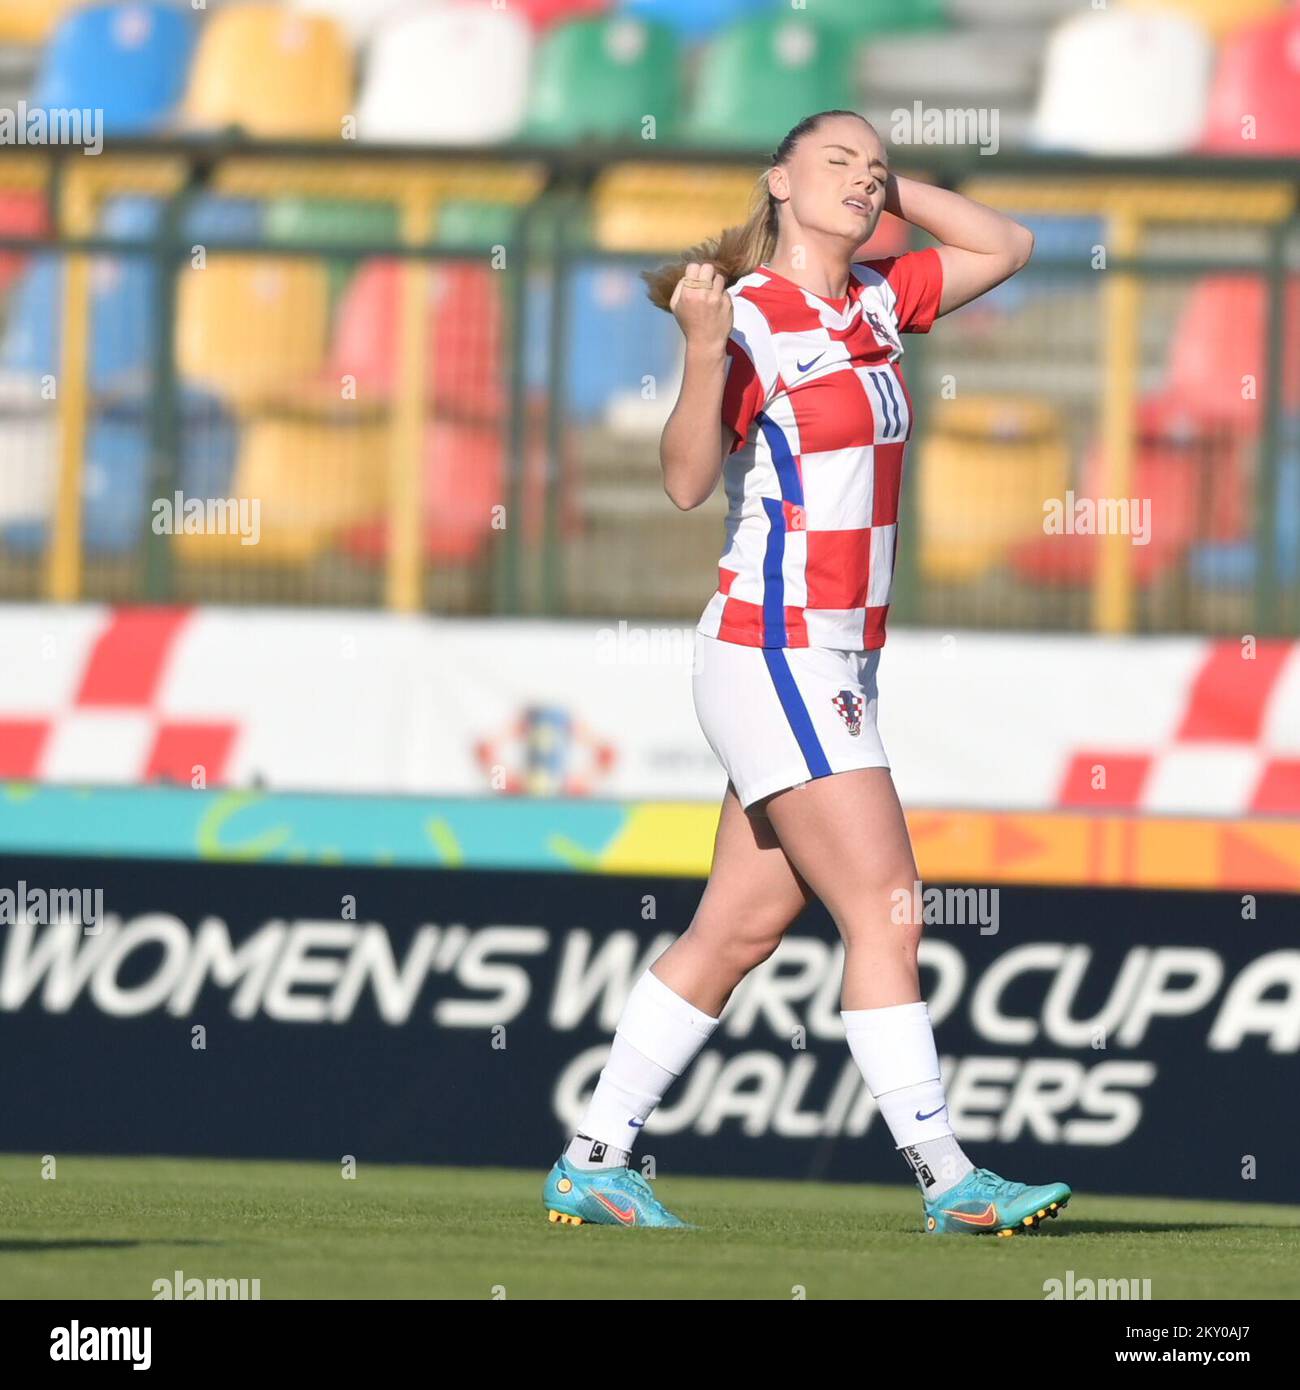 Ana Maria Markovic during the match in Velika Gorica near Zagreb, Croatia  on April 12, 2022. The match of the Croatian women's A national team  against Romania as part of the qualifications